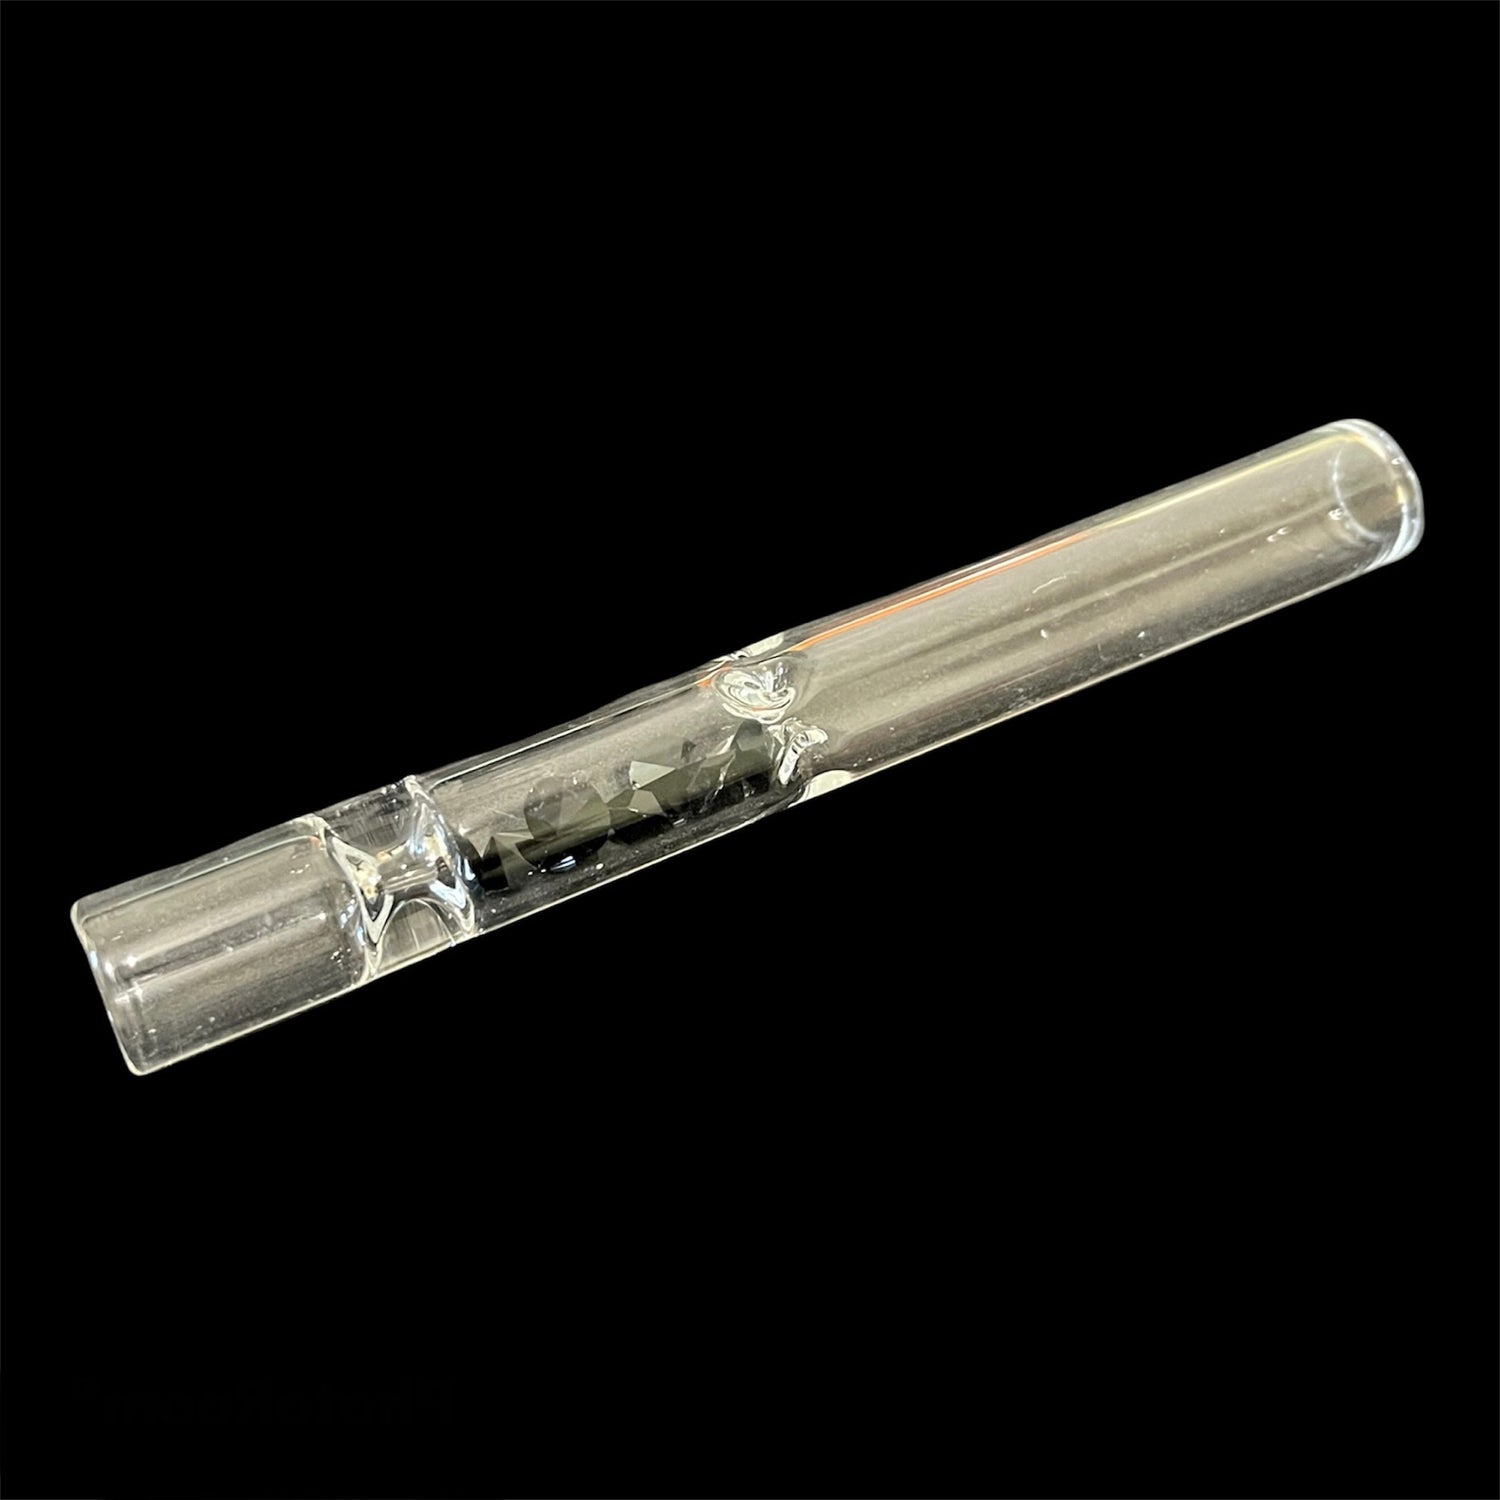 One Hitter Diamond Glass Pipes, Chillum Glass Smoking Pipes, Best Seller  One Hitter Pipes